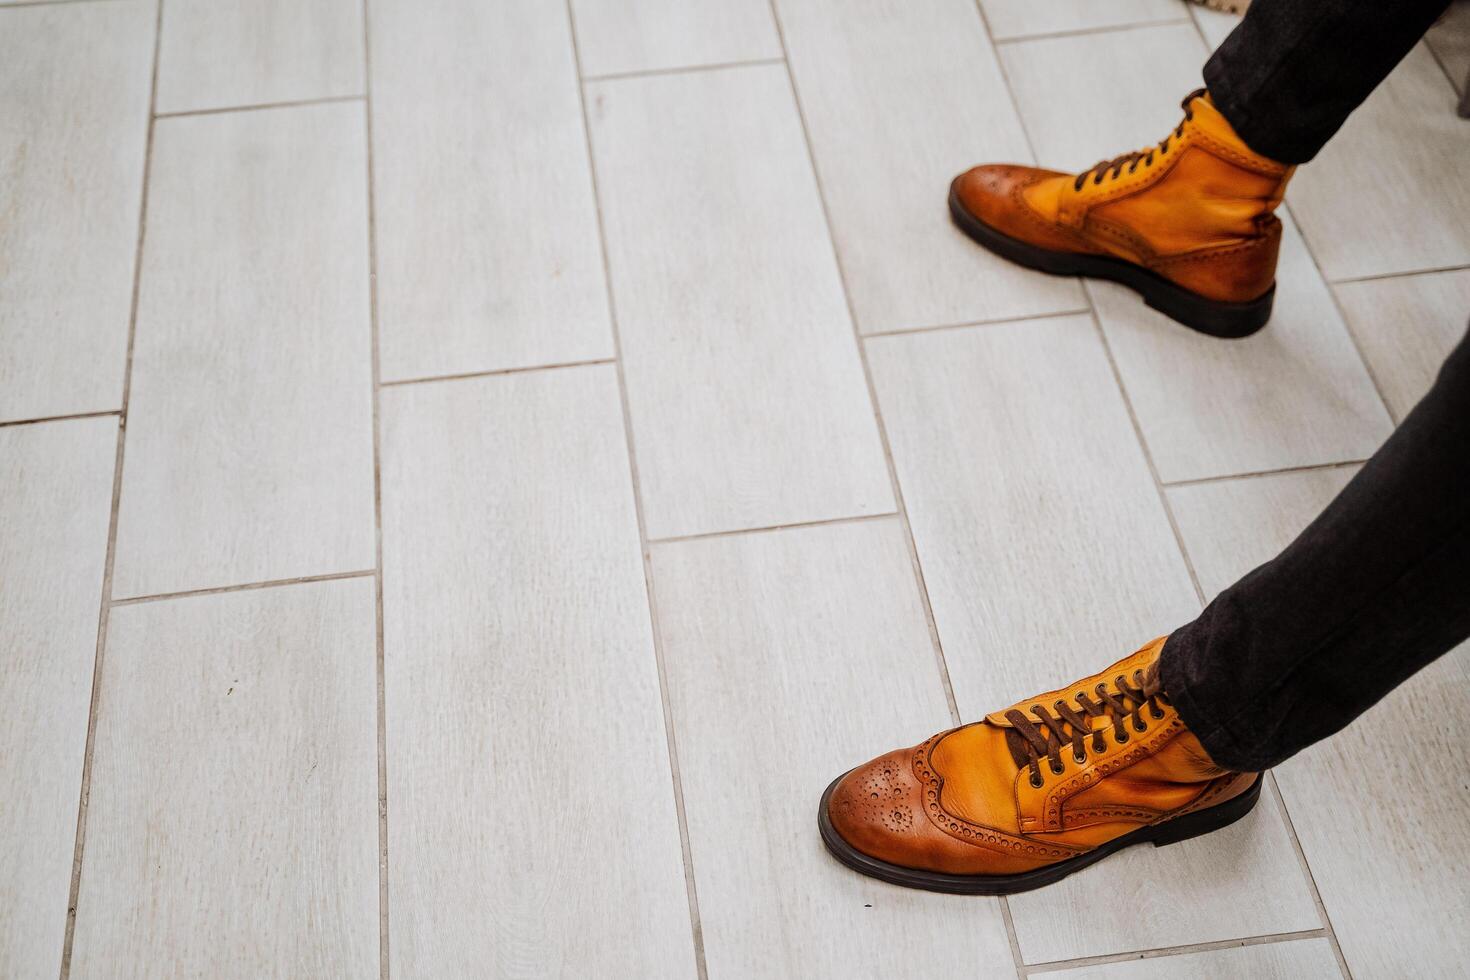 The guy wears stylish orange shoes. Two legs are on the floor. Men's feet are shod in classic genuine leather boots. photo